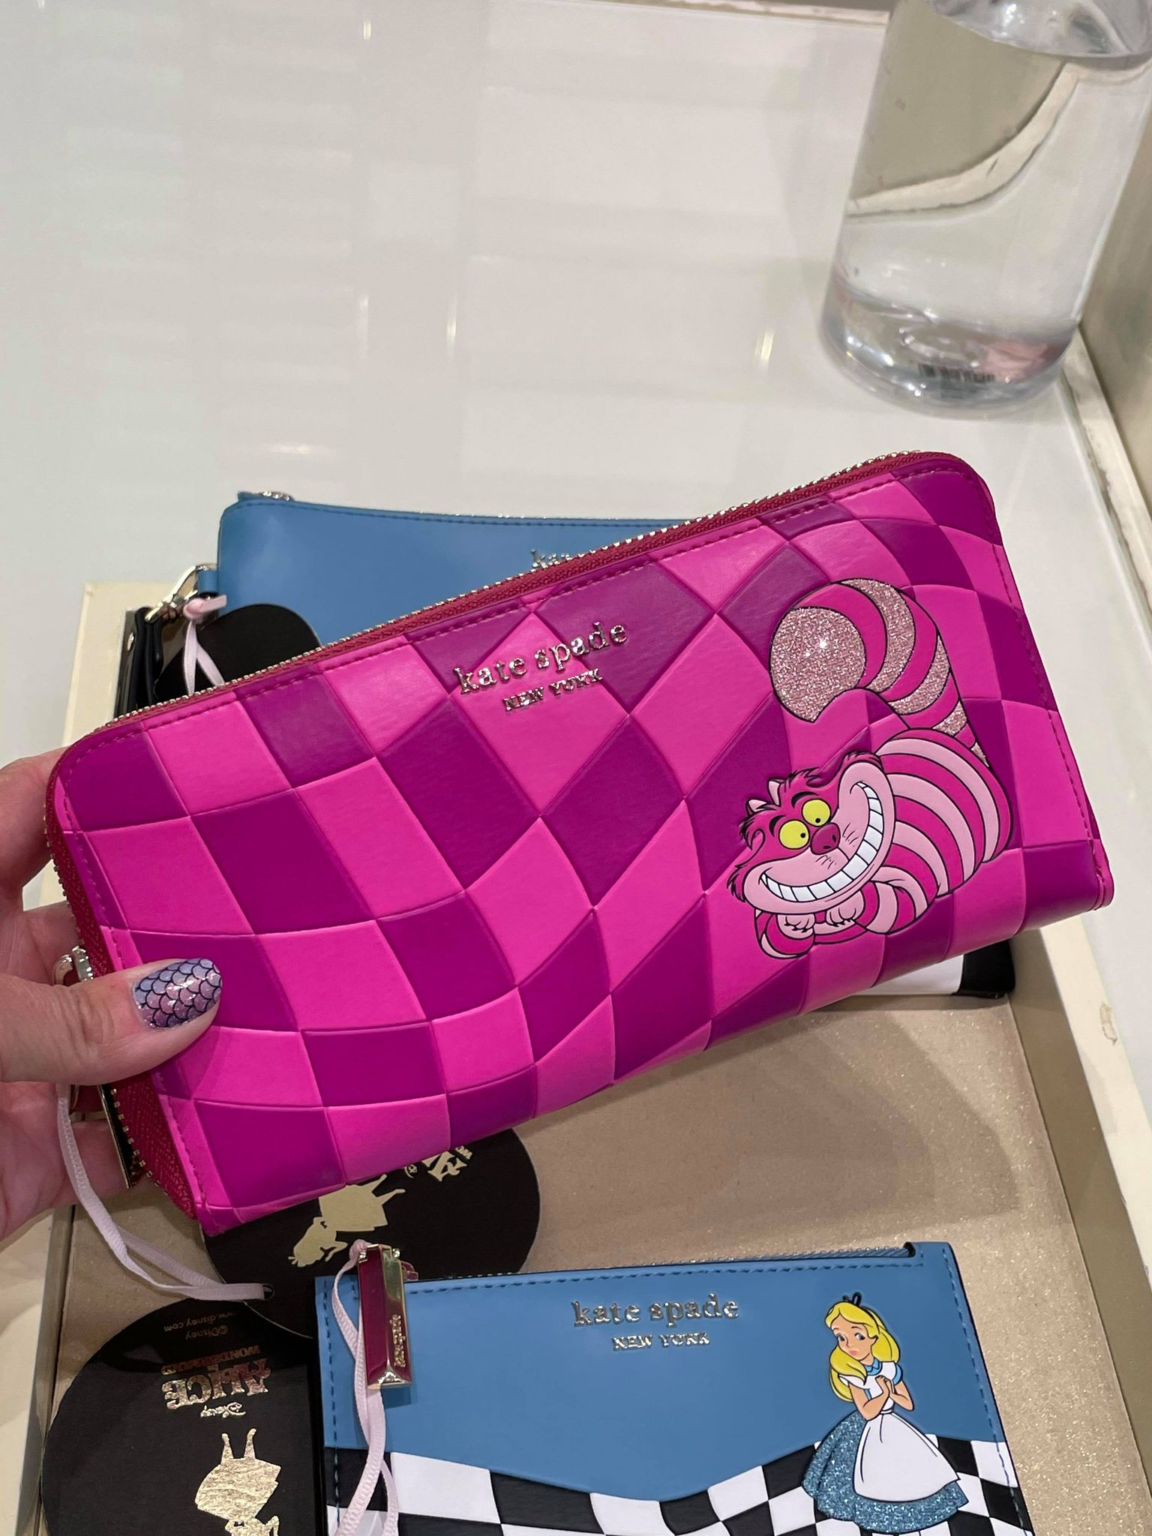 An Alice In Wonderland Kate Spade Collection Has Arrived At Disney